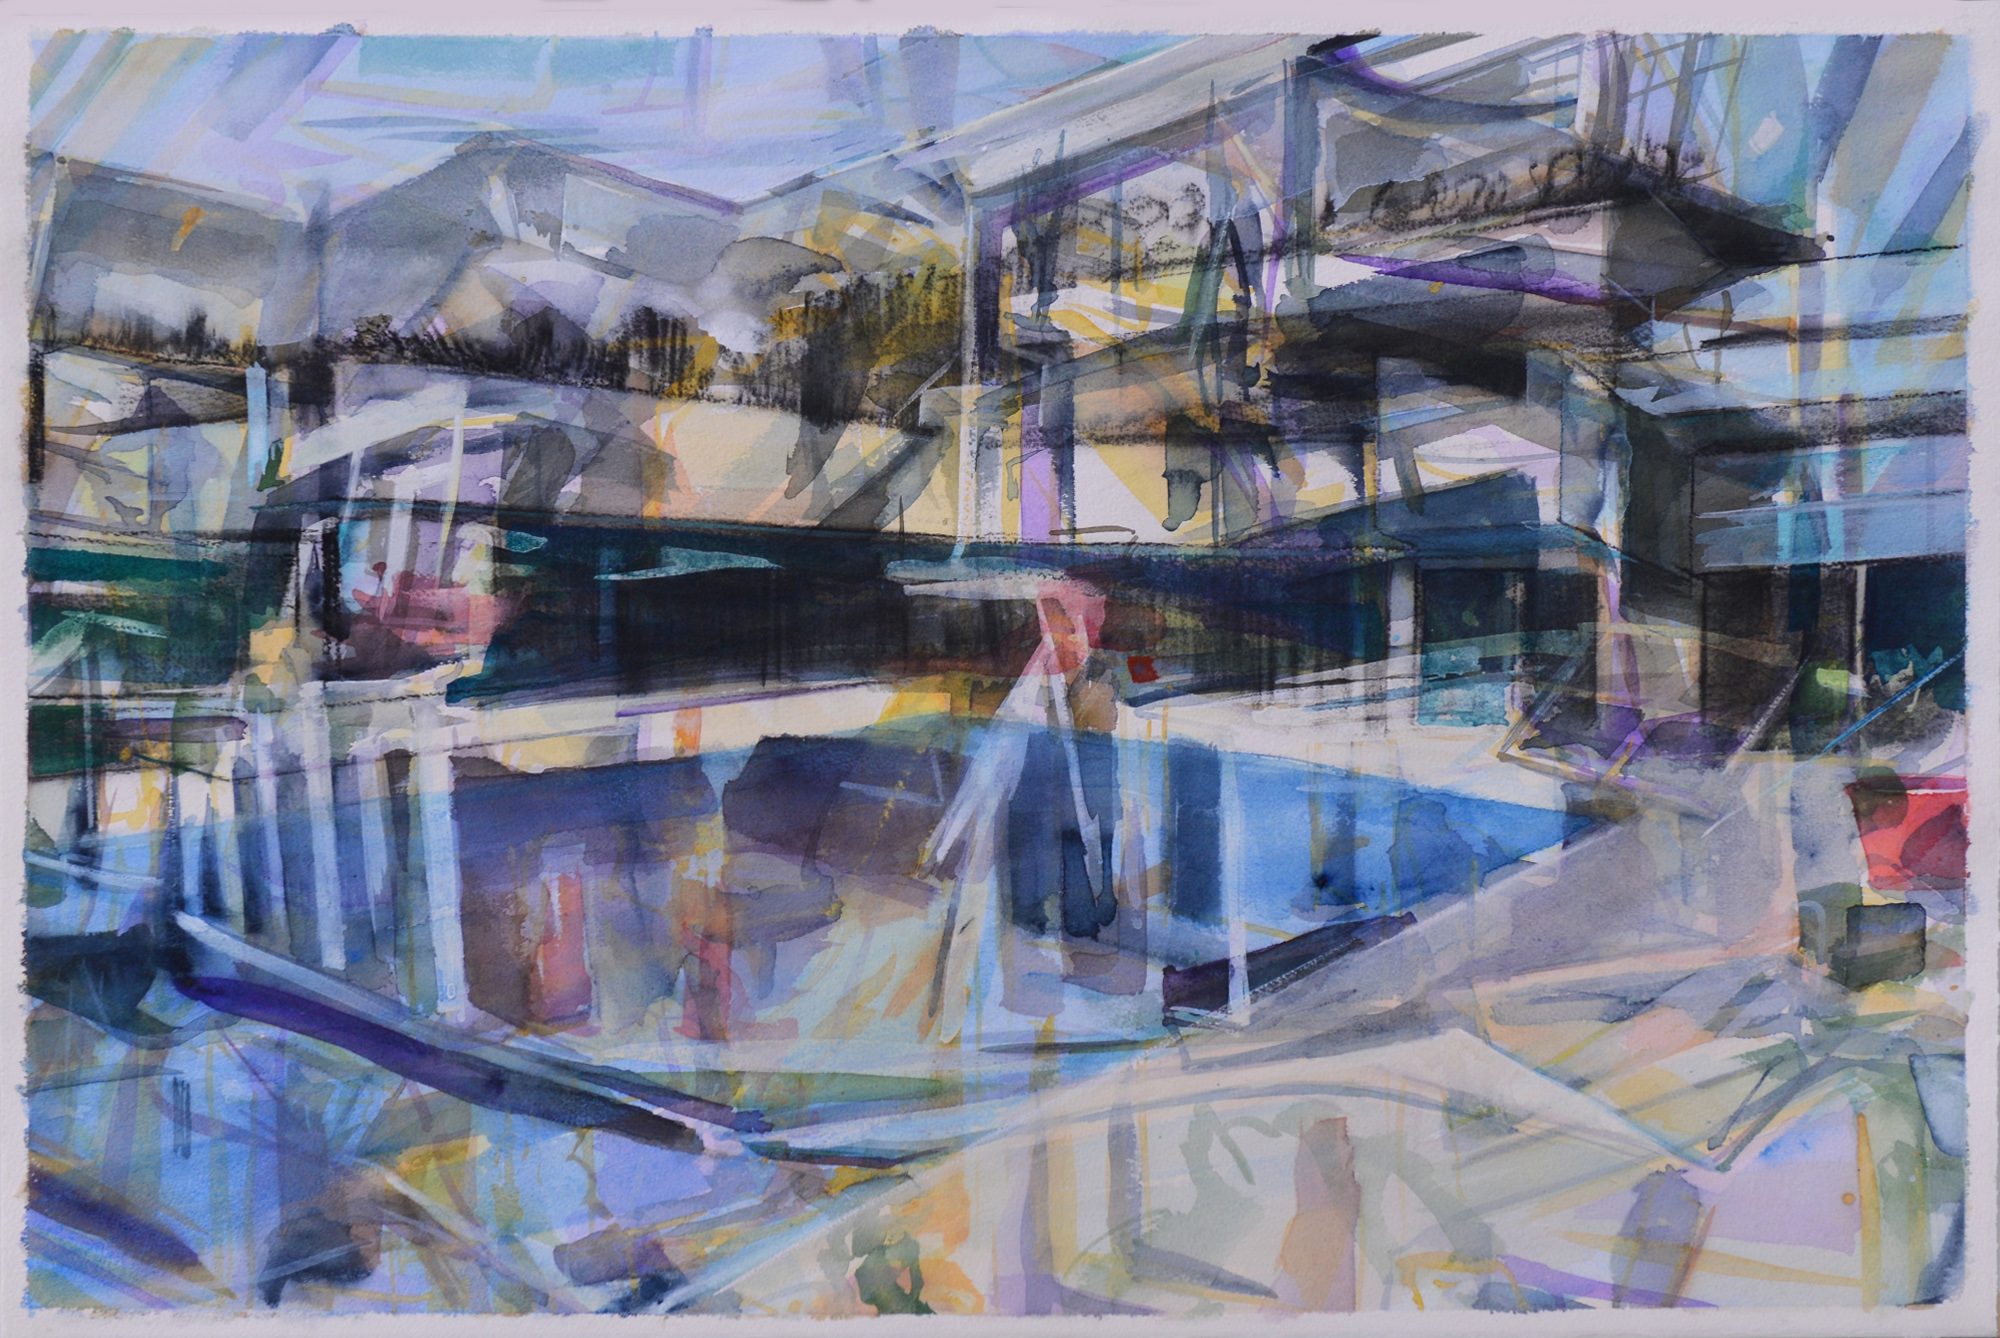   False Reflection (villa moderne),&nbsp; 2015, watercolour, gouache and charcoal on paper, 49 x 74cm. Private collection, France 